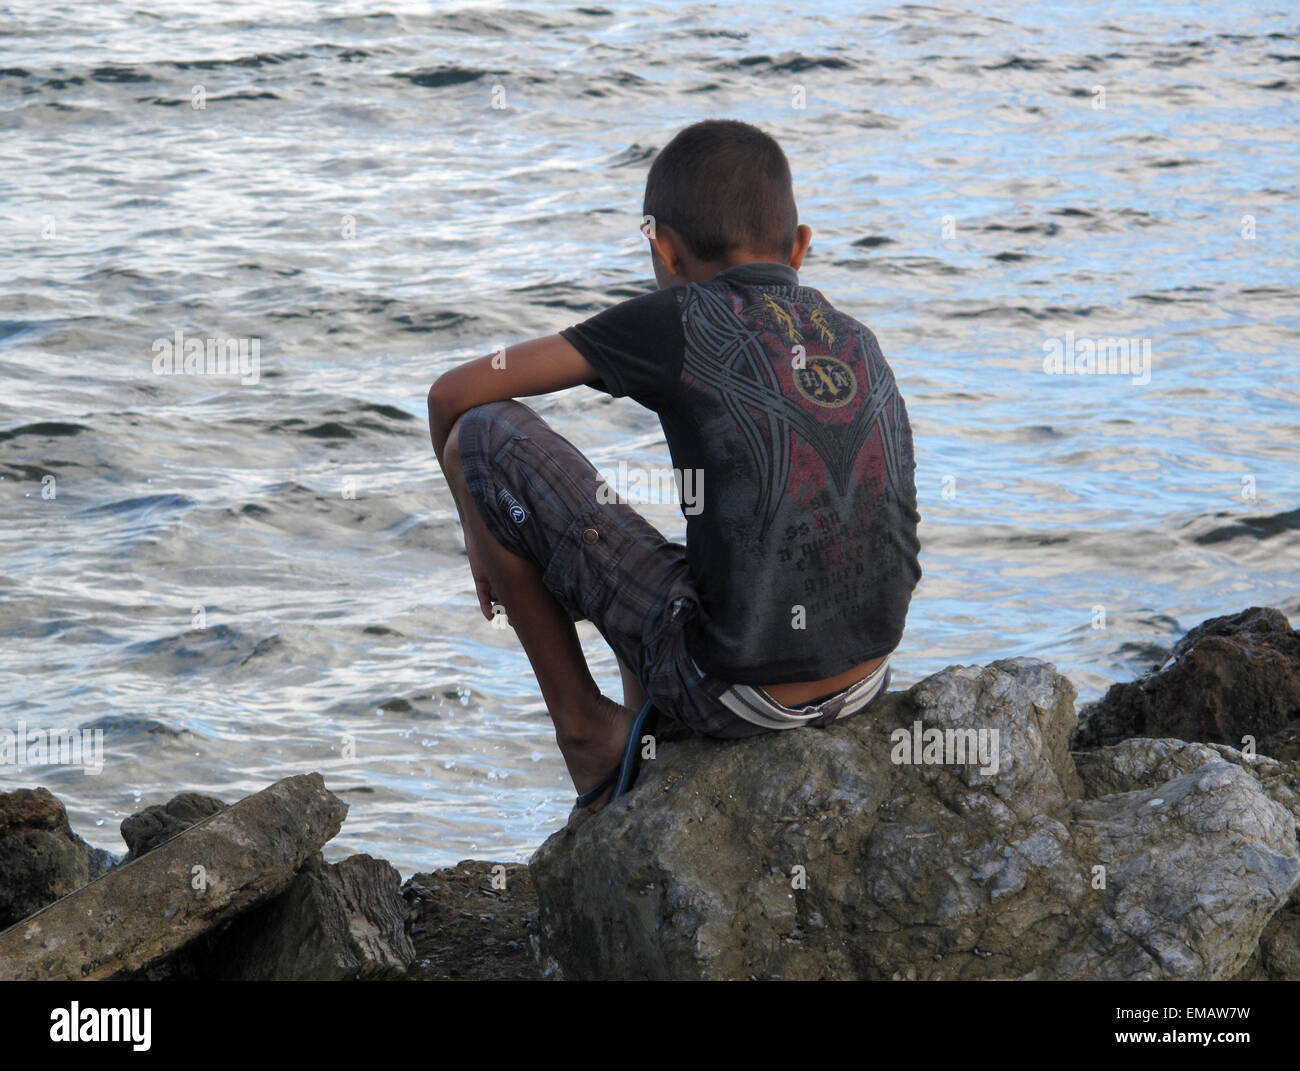 Back view of boy sitting on rock looking into water. Stock Photo